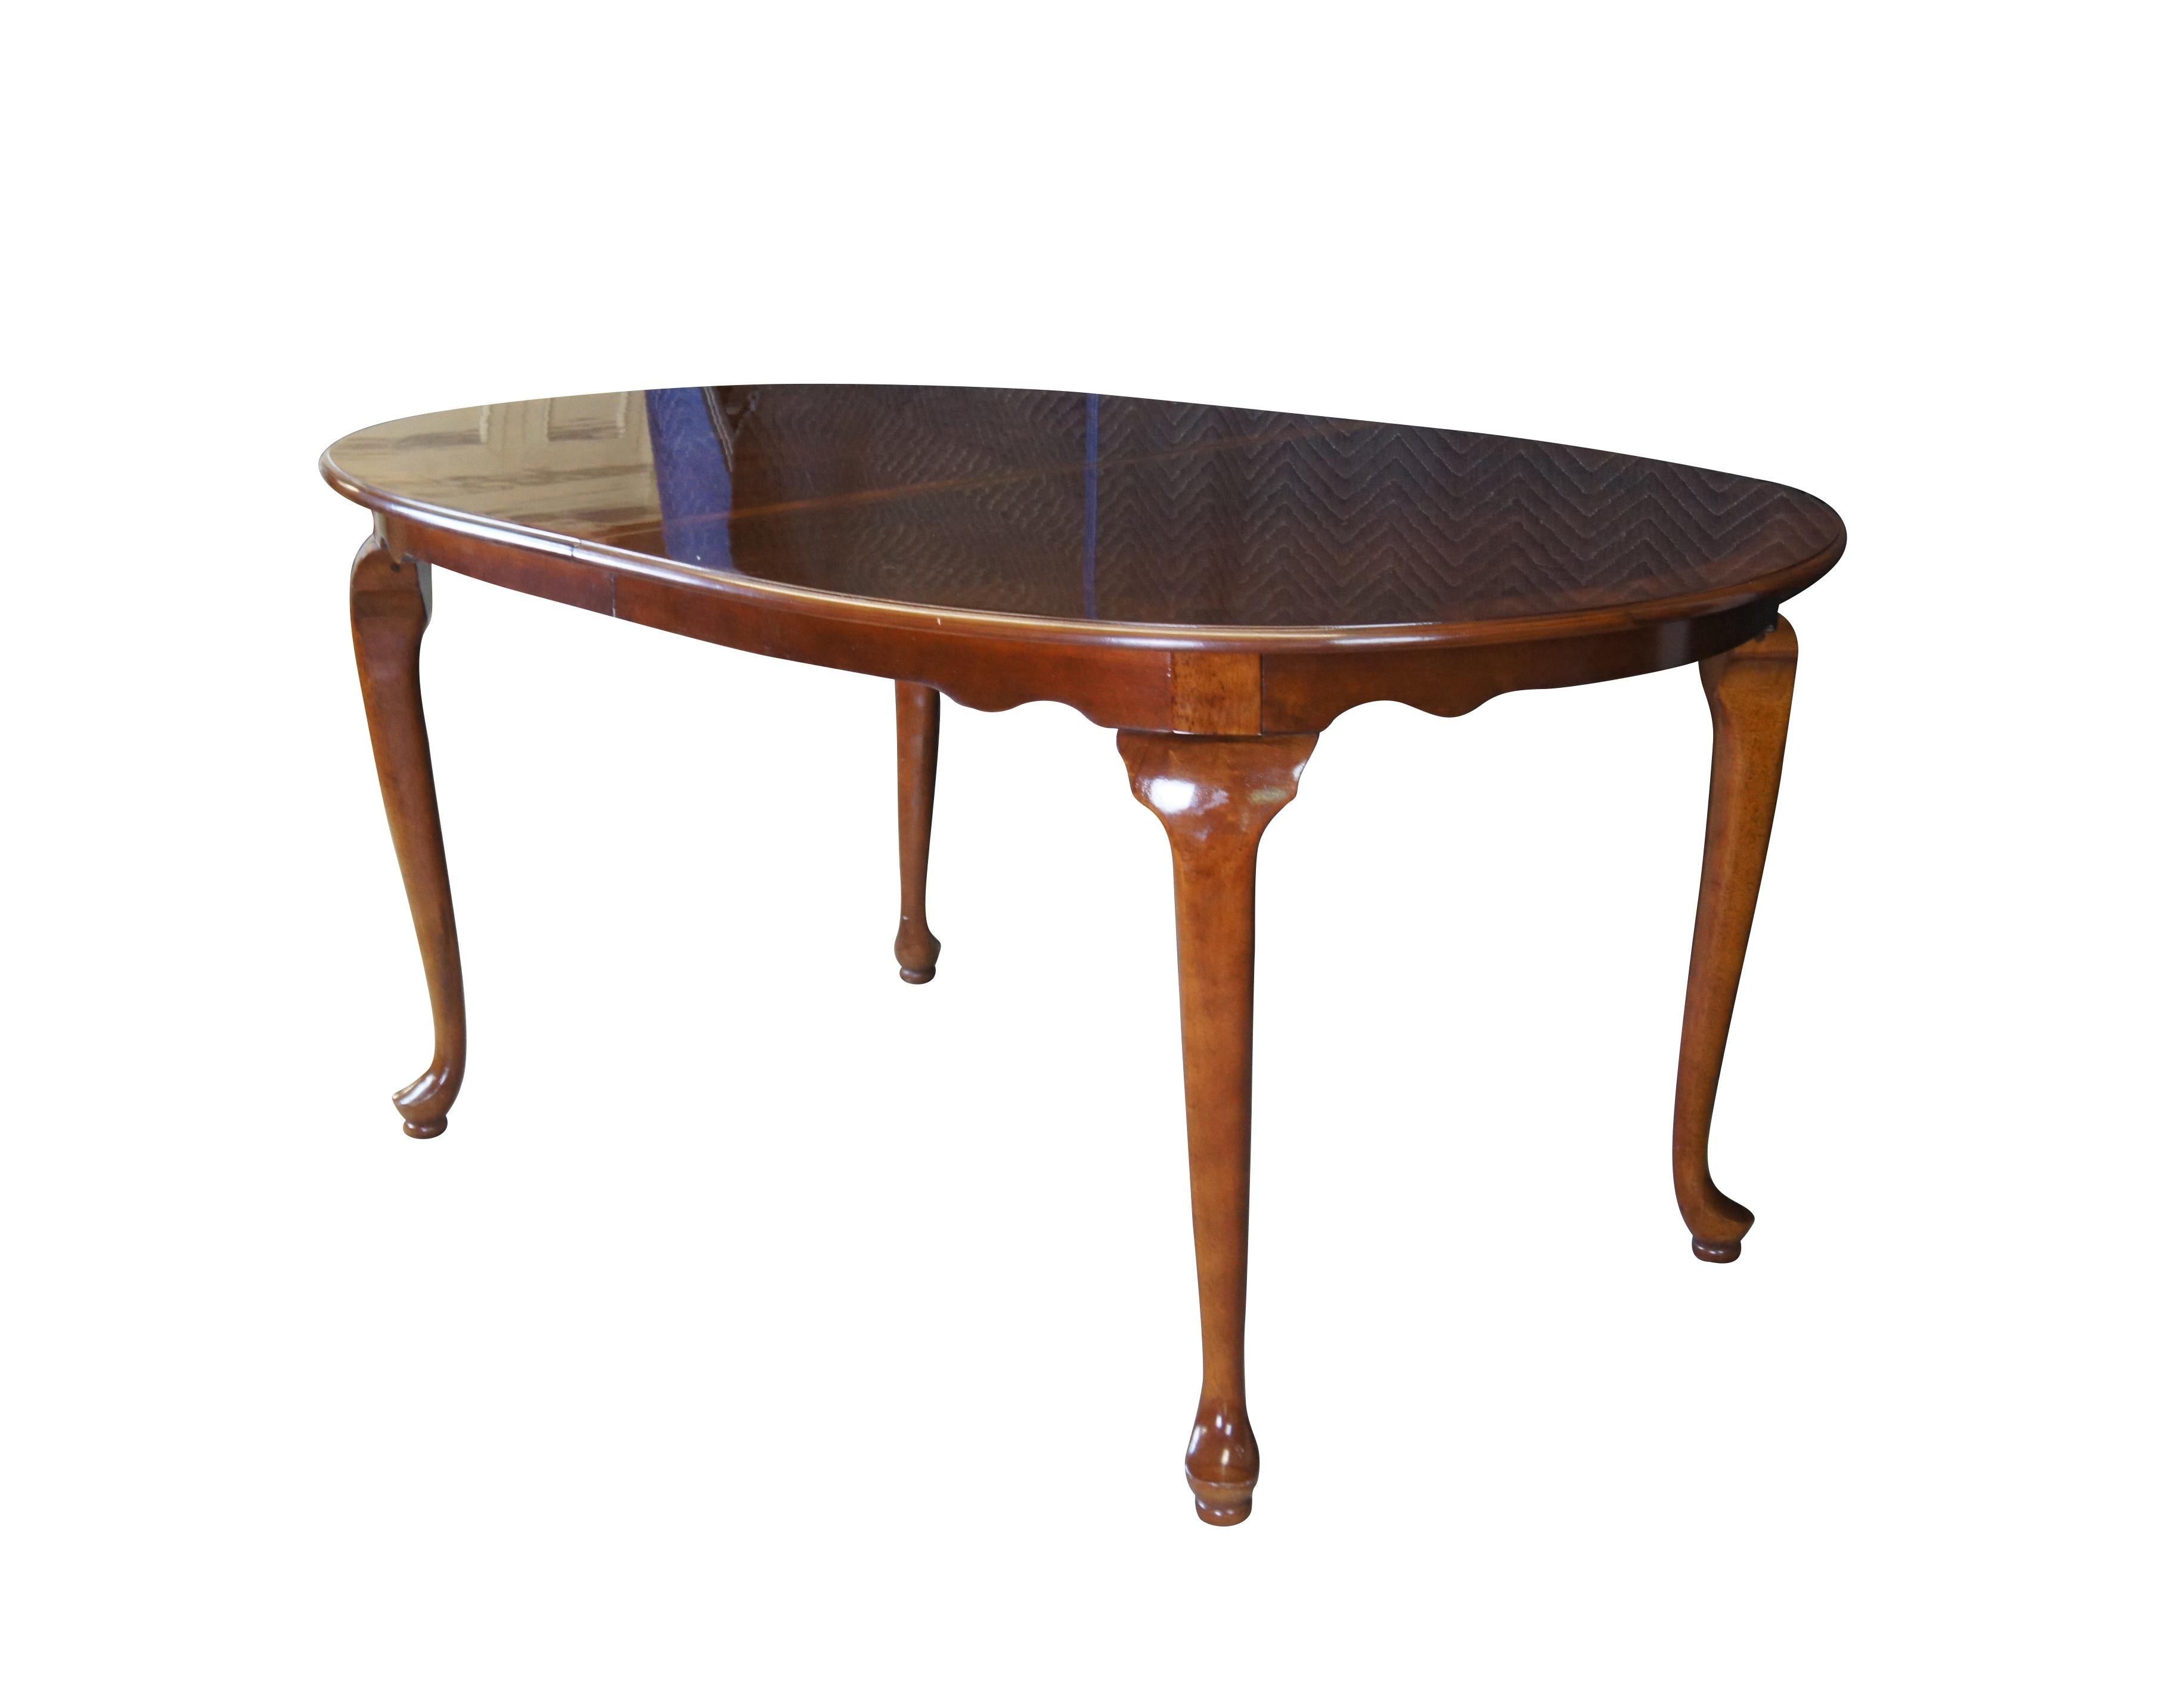 A lovely dining table by Cresent Manufacturing Company, circa 1970s. Features an oval Queen Anne form made from cherry with banded edge around the top. Includes two leaves for extension up to 93